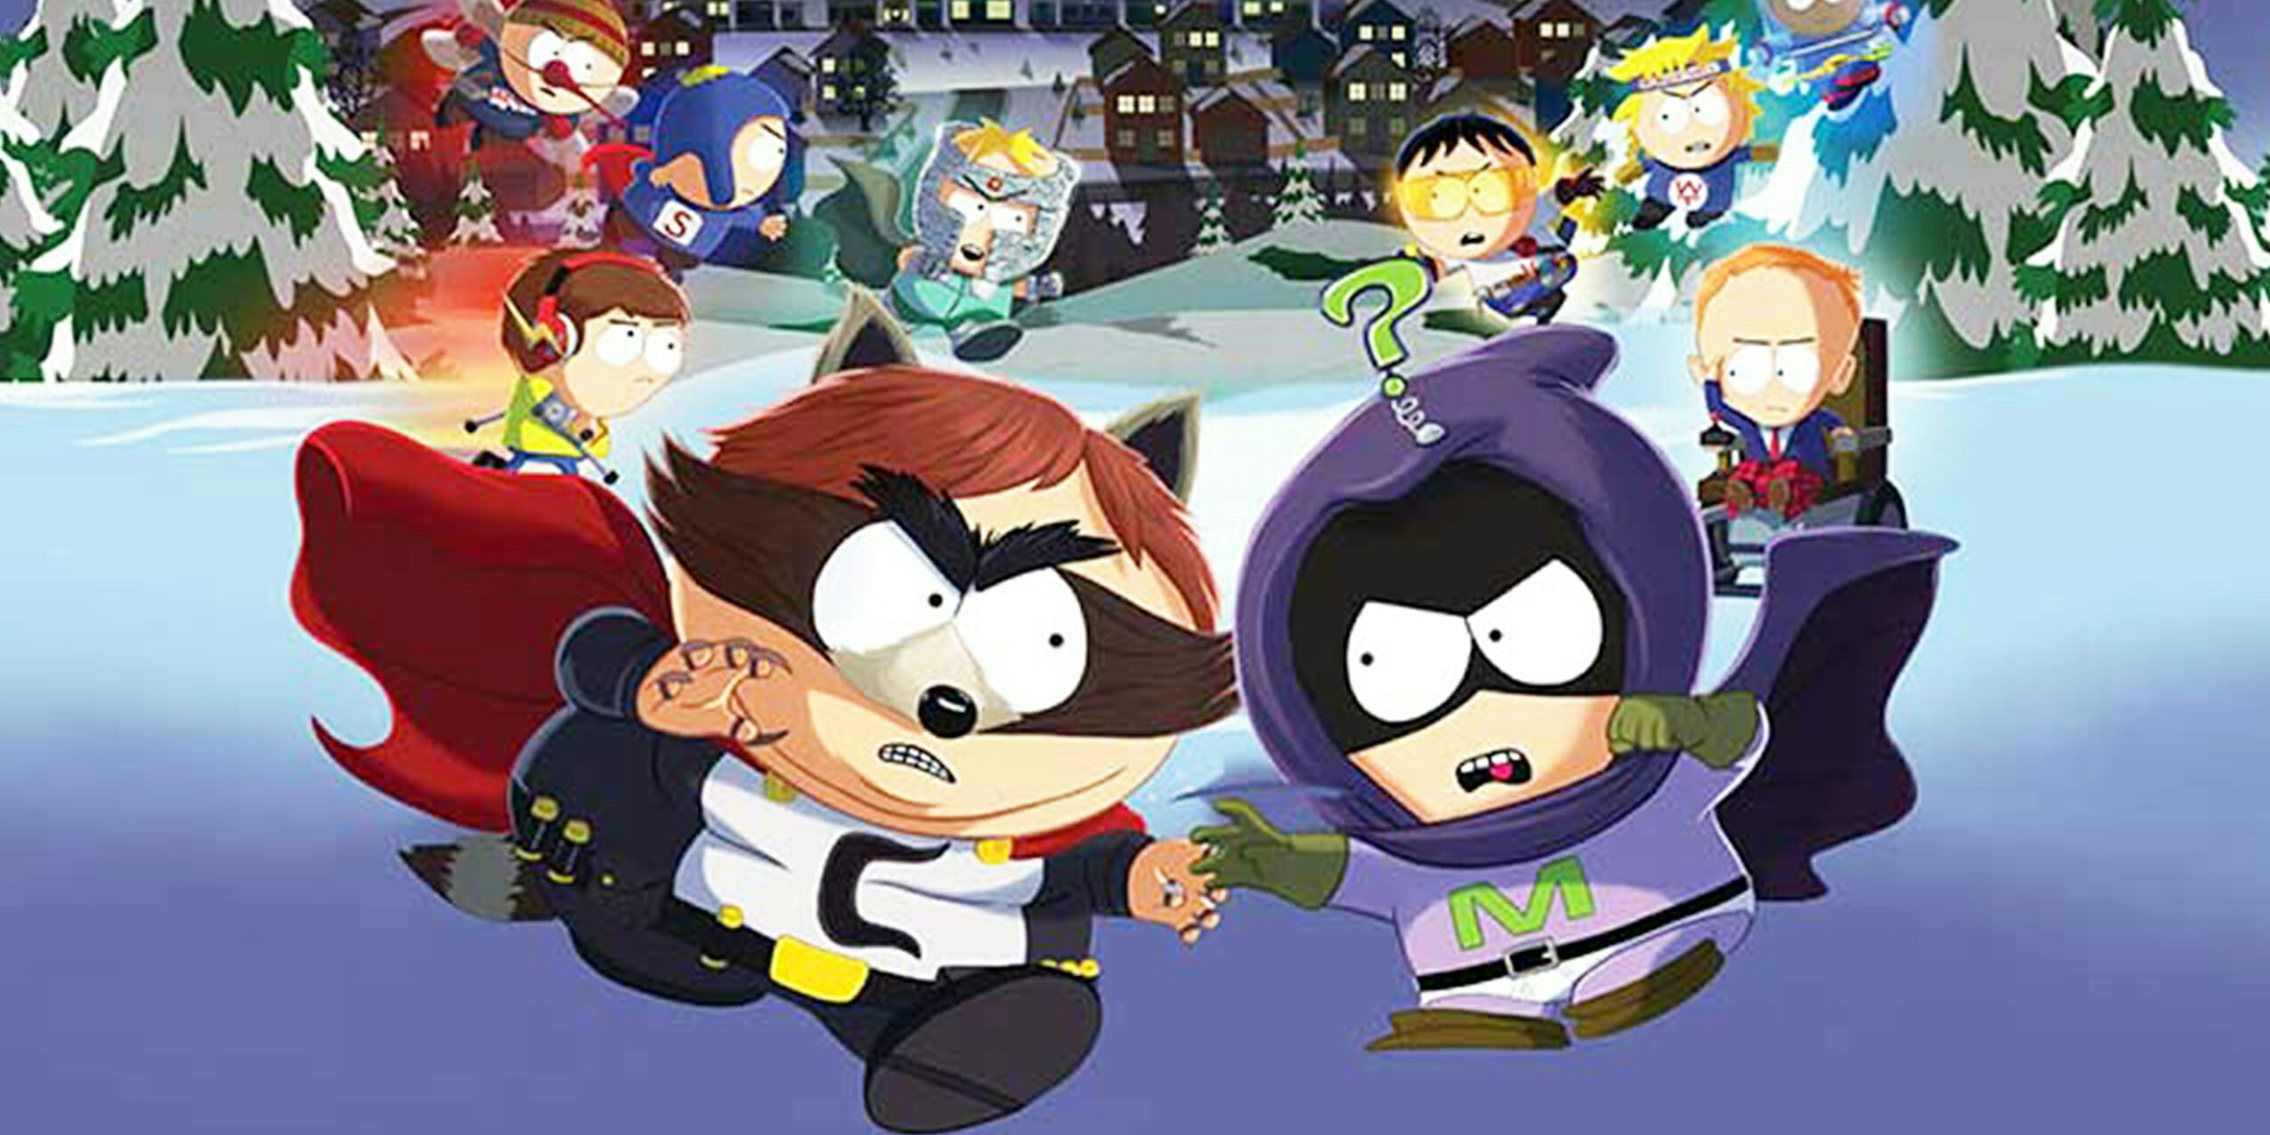 south-park-the-fractured-but-whole